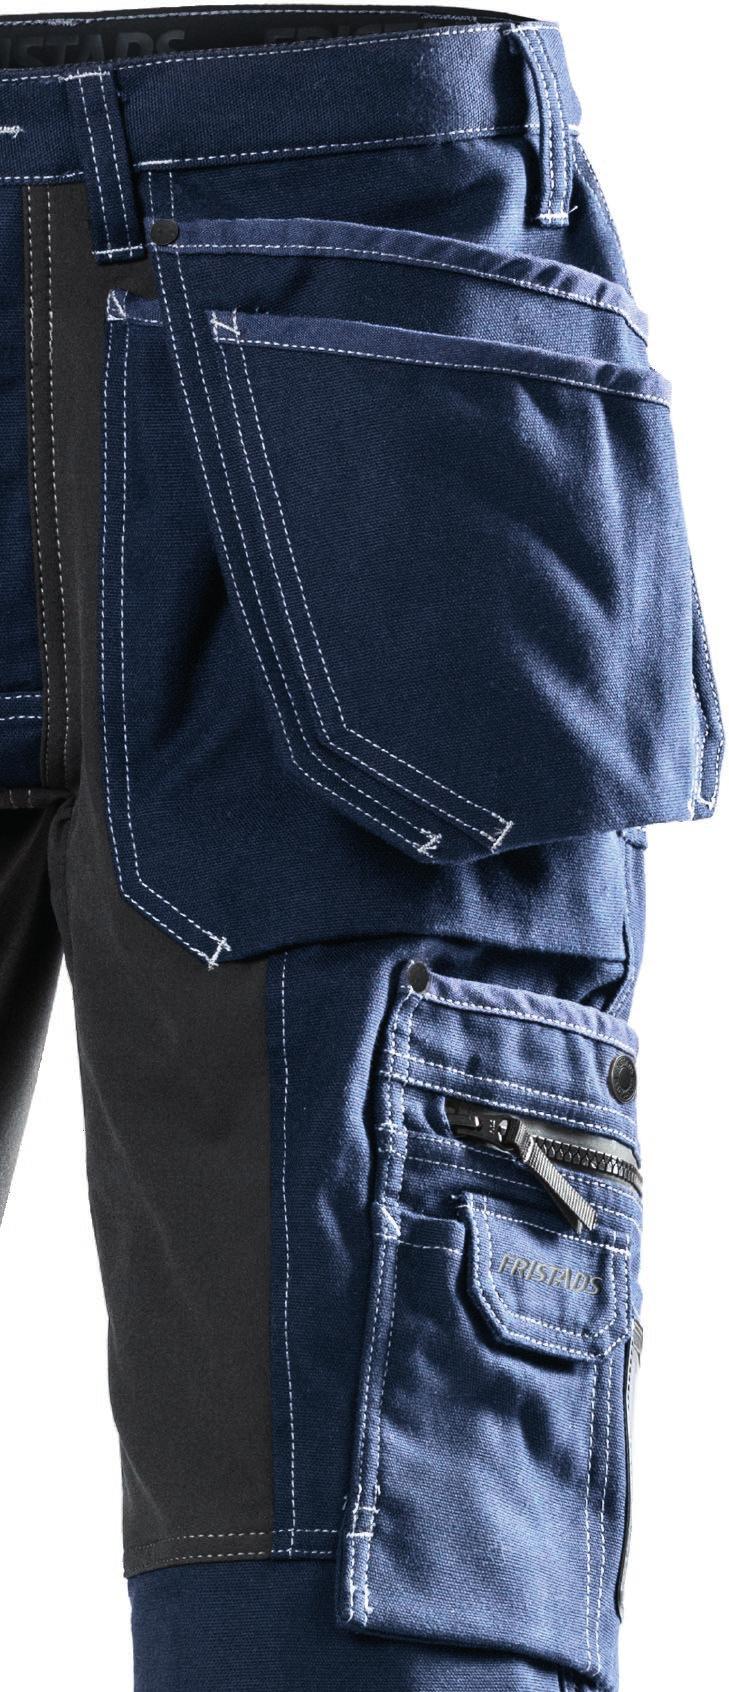 The back yoke and rear of the trousers, underneath the back pockets, are made of stretch material to give maximum mobility and comfort.